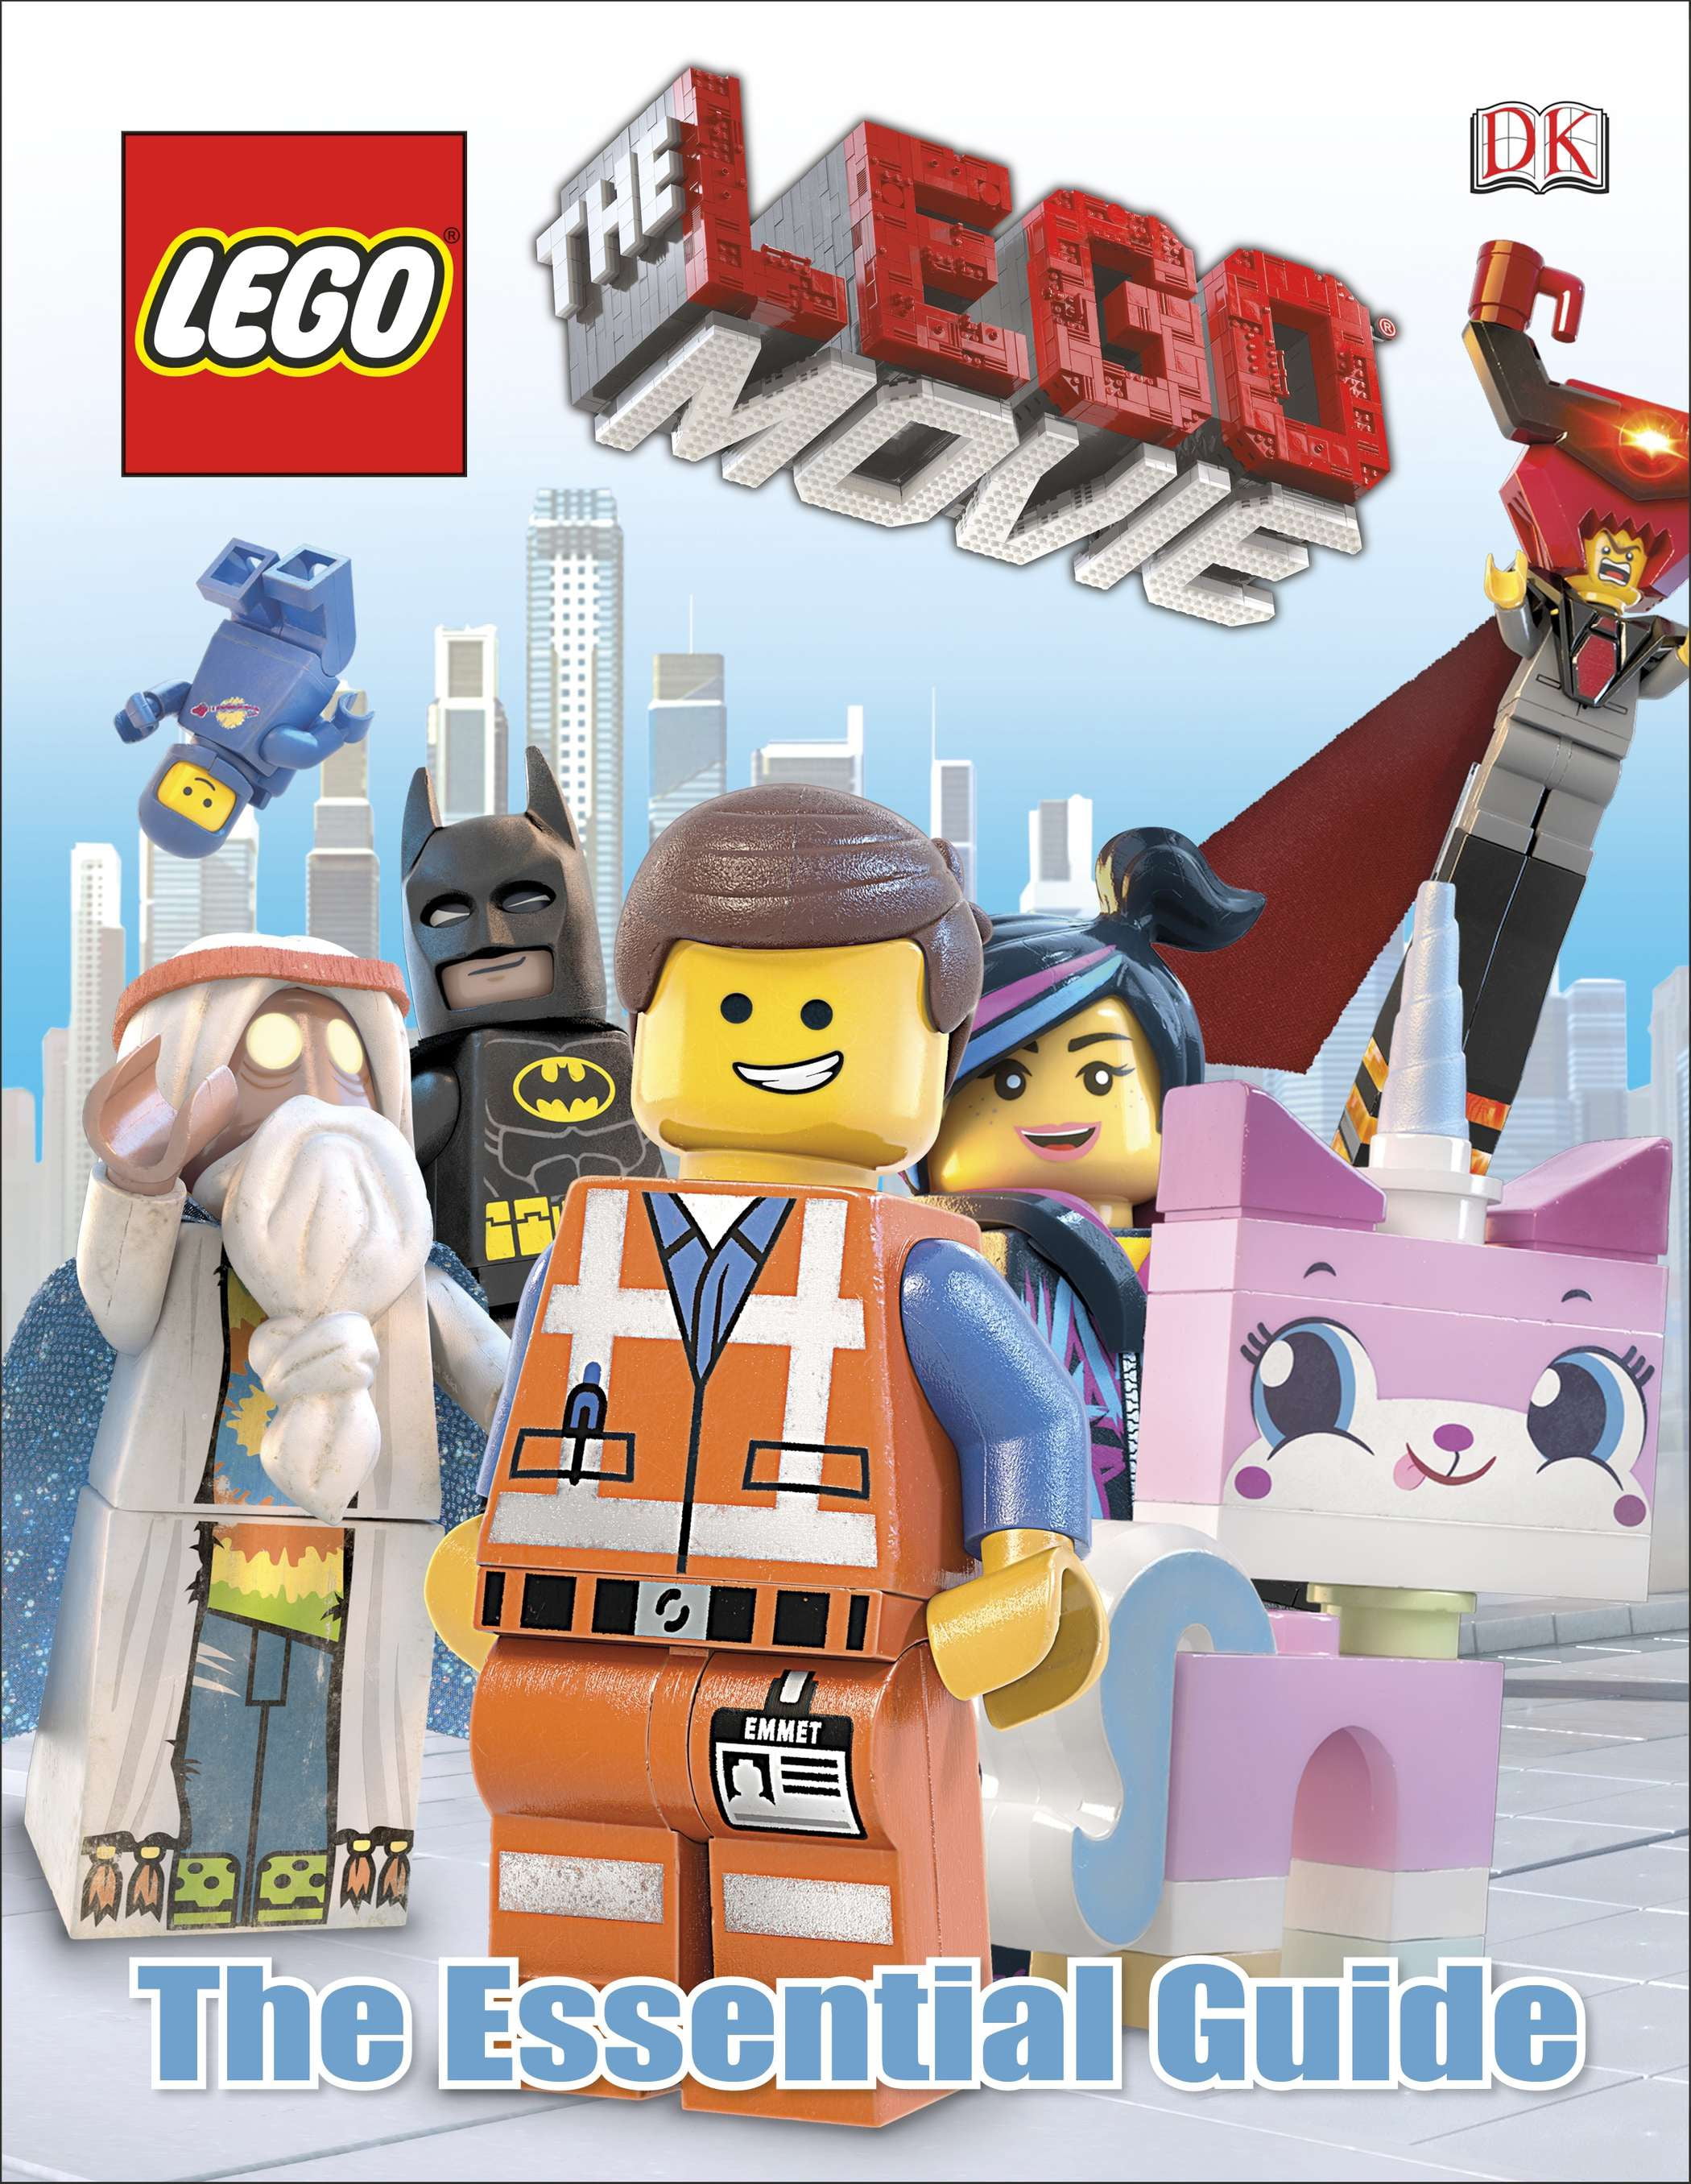 Mælkehvid Ooze G DK Essential Guides: The Lego Movie: The Essential Guide (Hardcover) -  Walmart.com